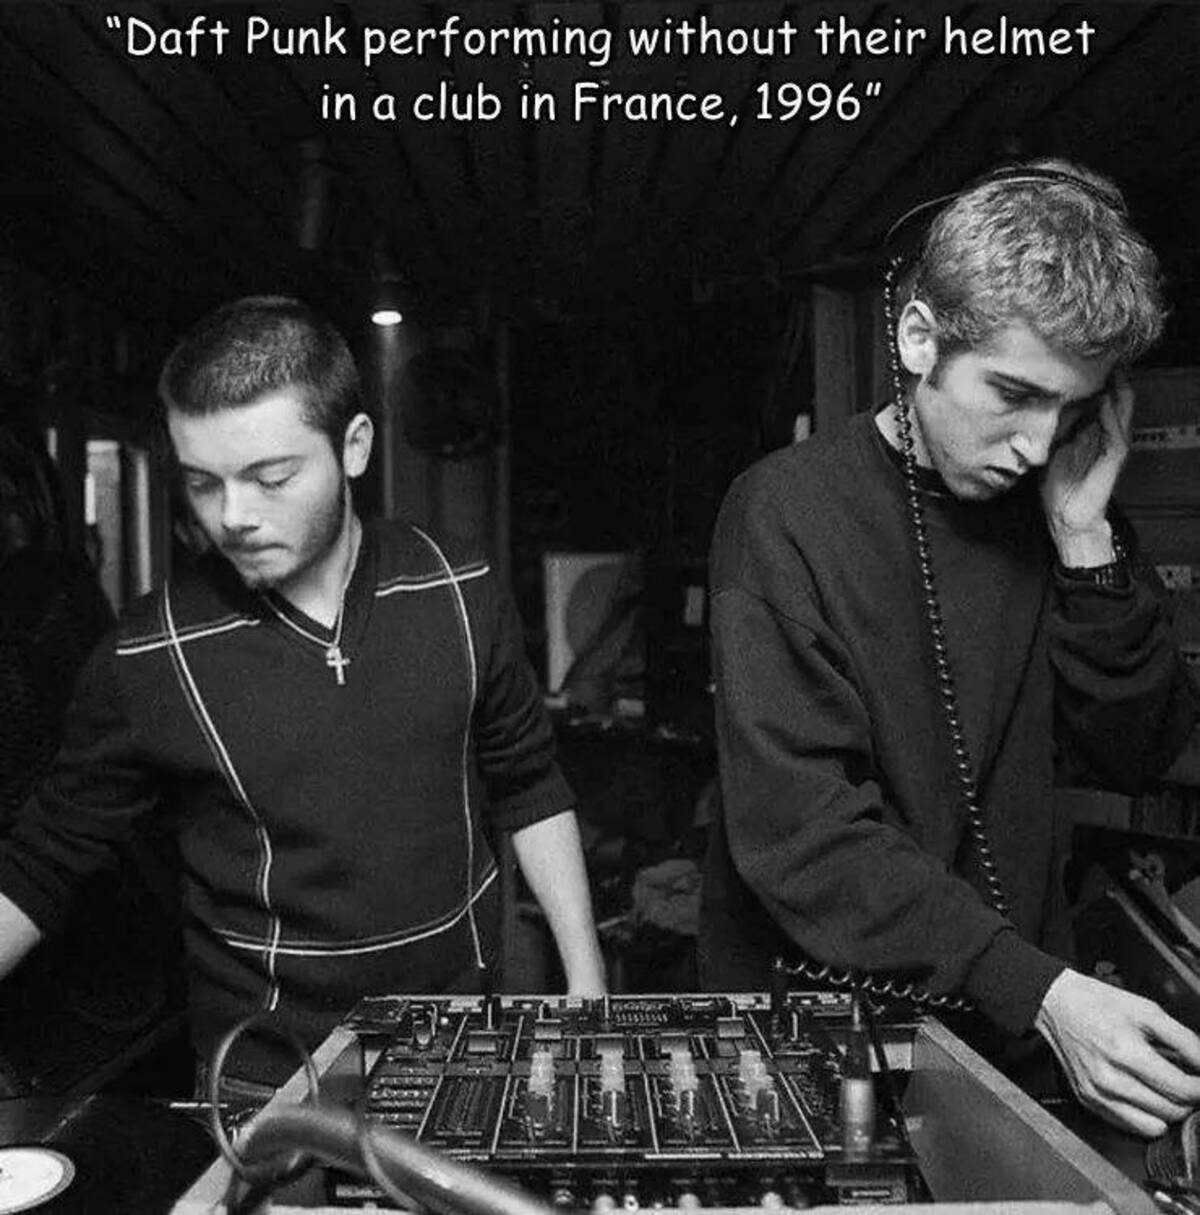 anfer daft punk - "Daft Punk performing without their helmet in a club in France, 1996"